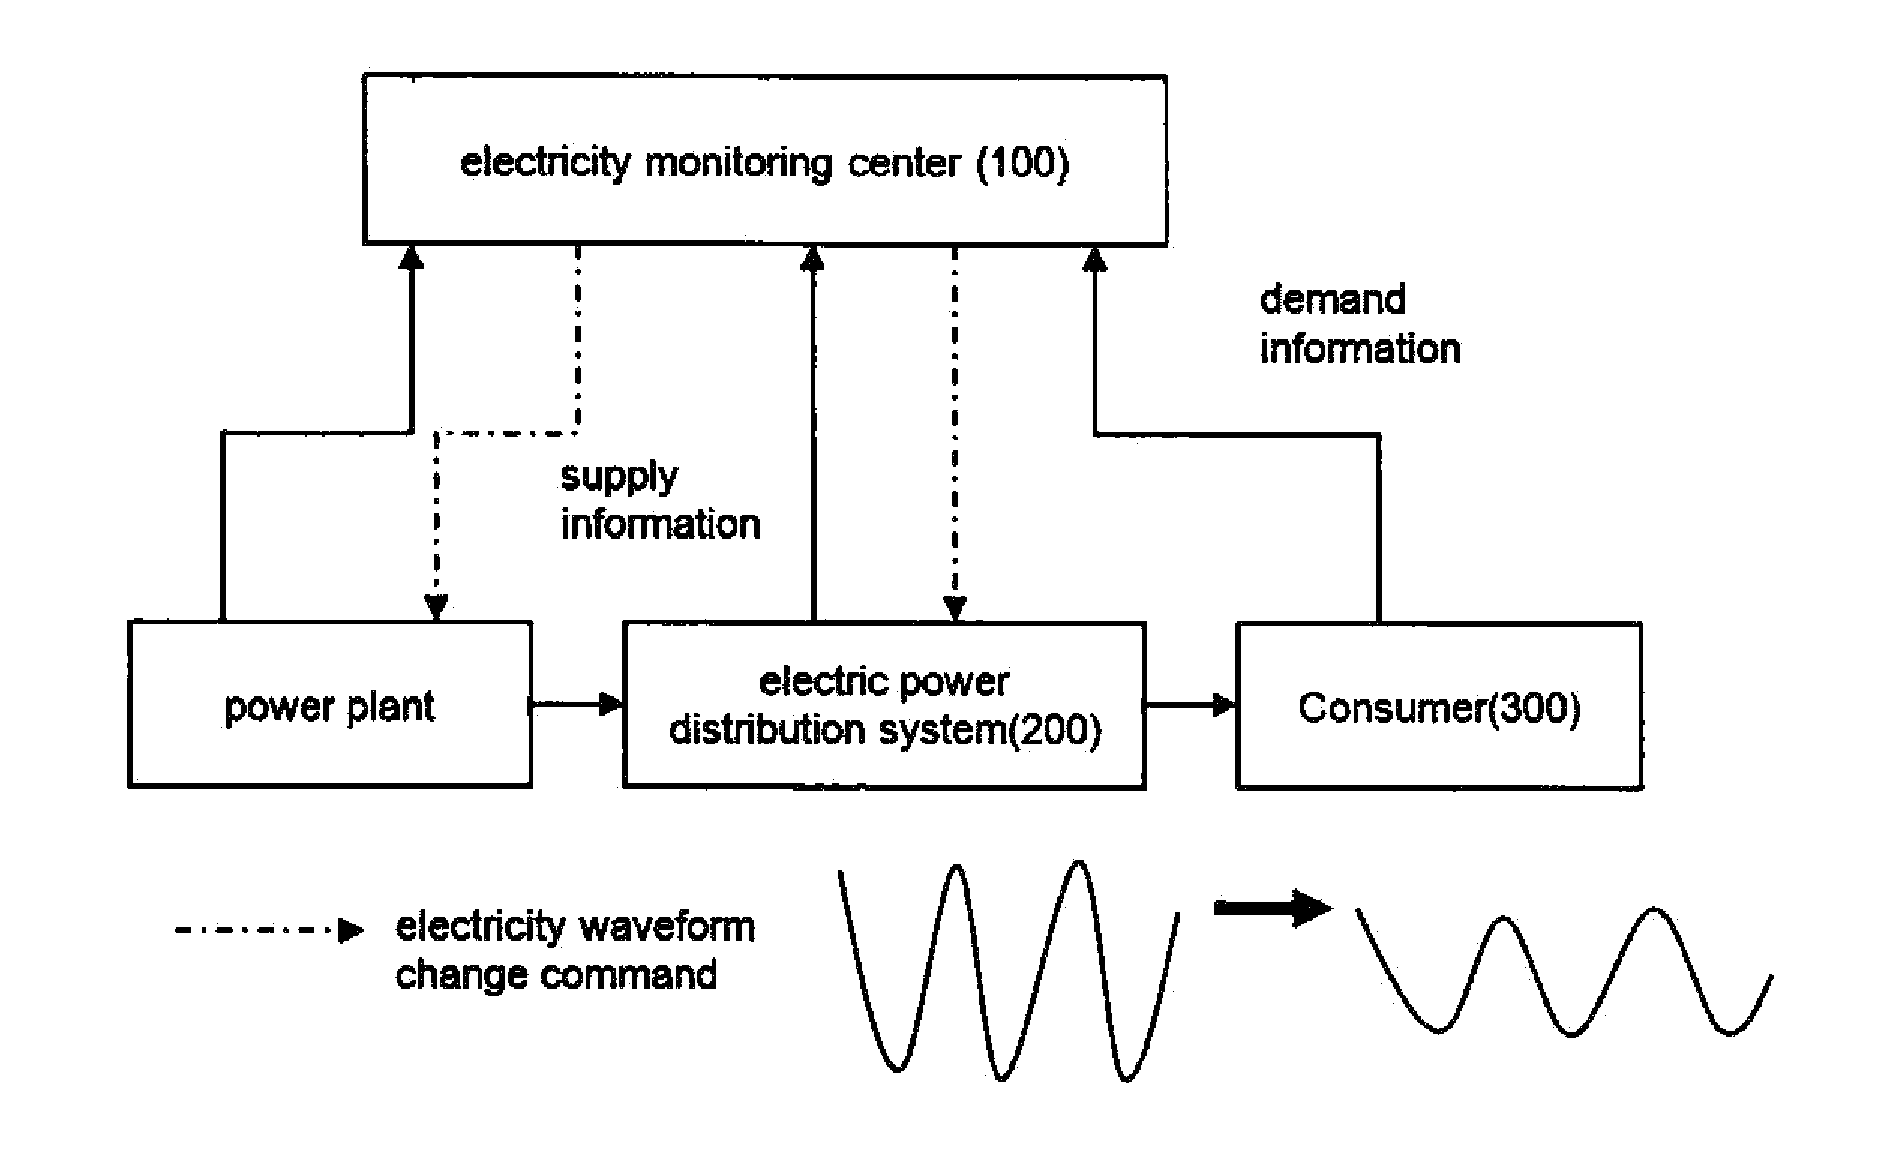 System for preventing disasters caused by power supply and demand mismatches